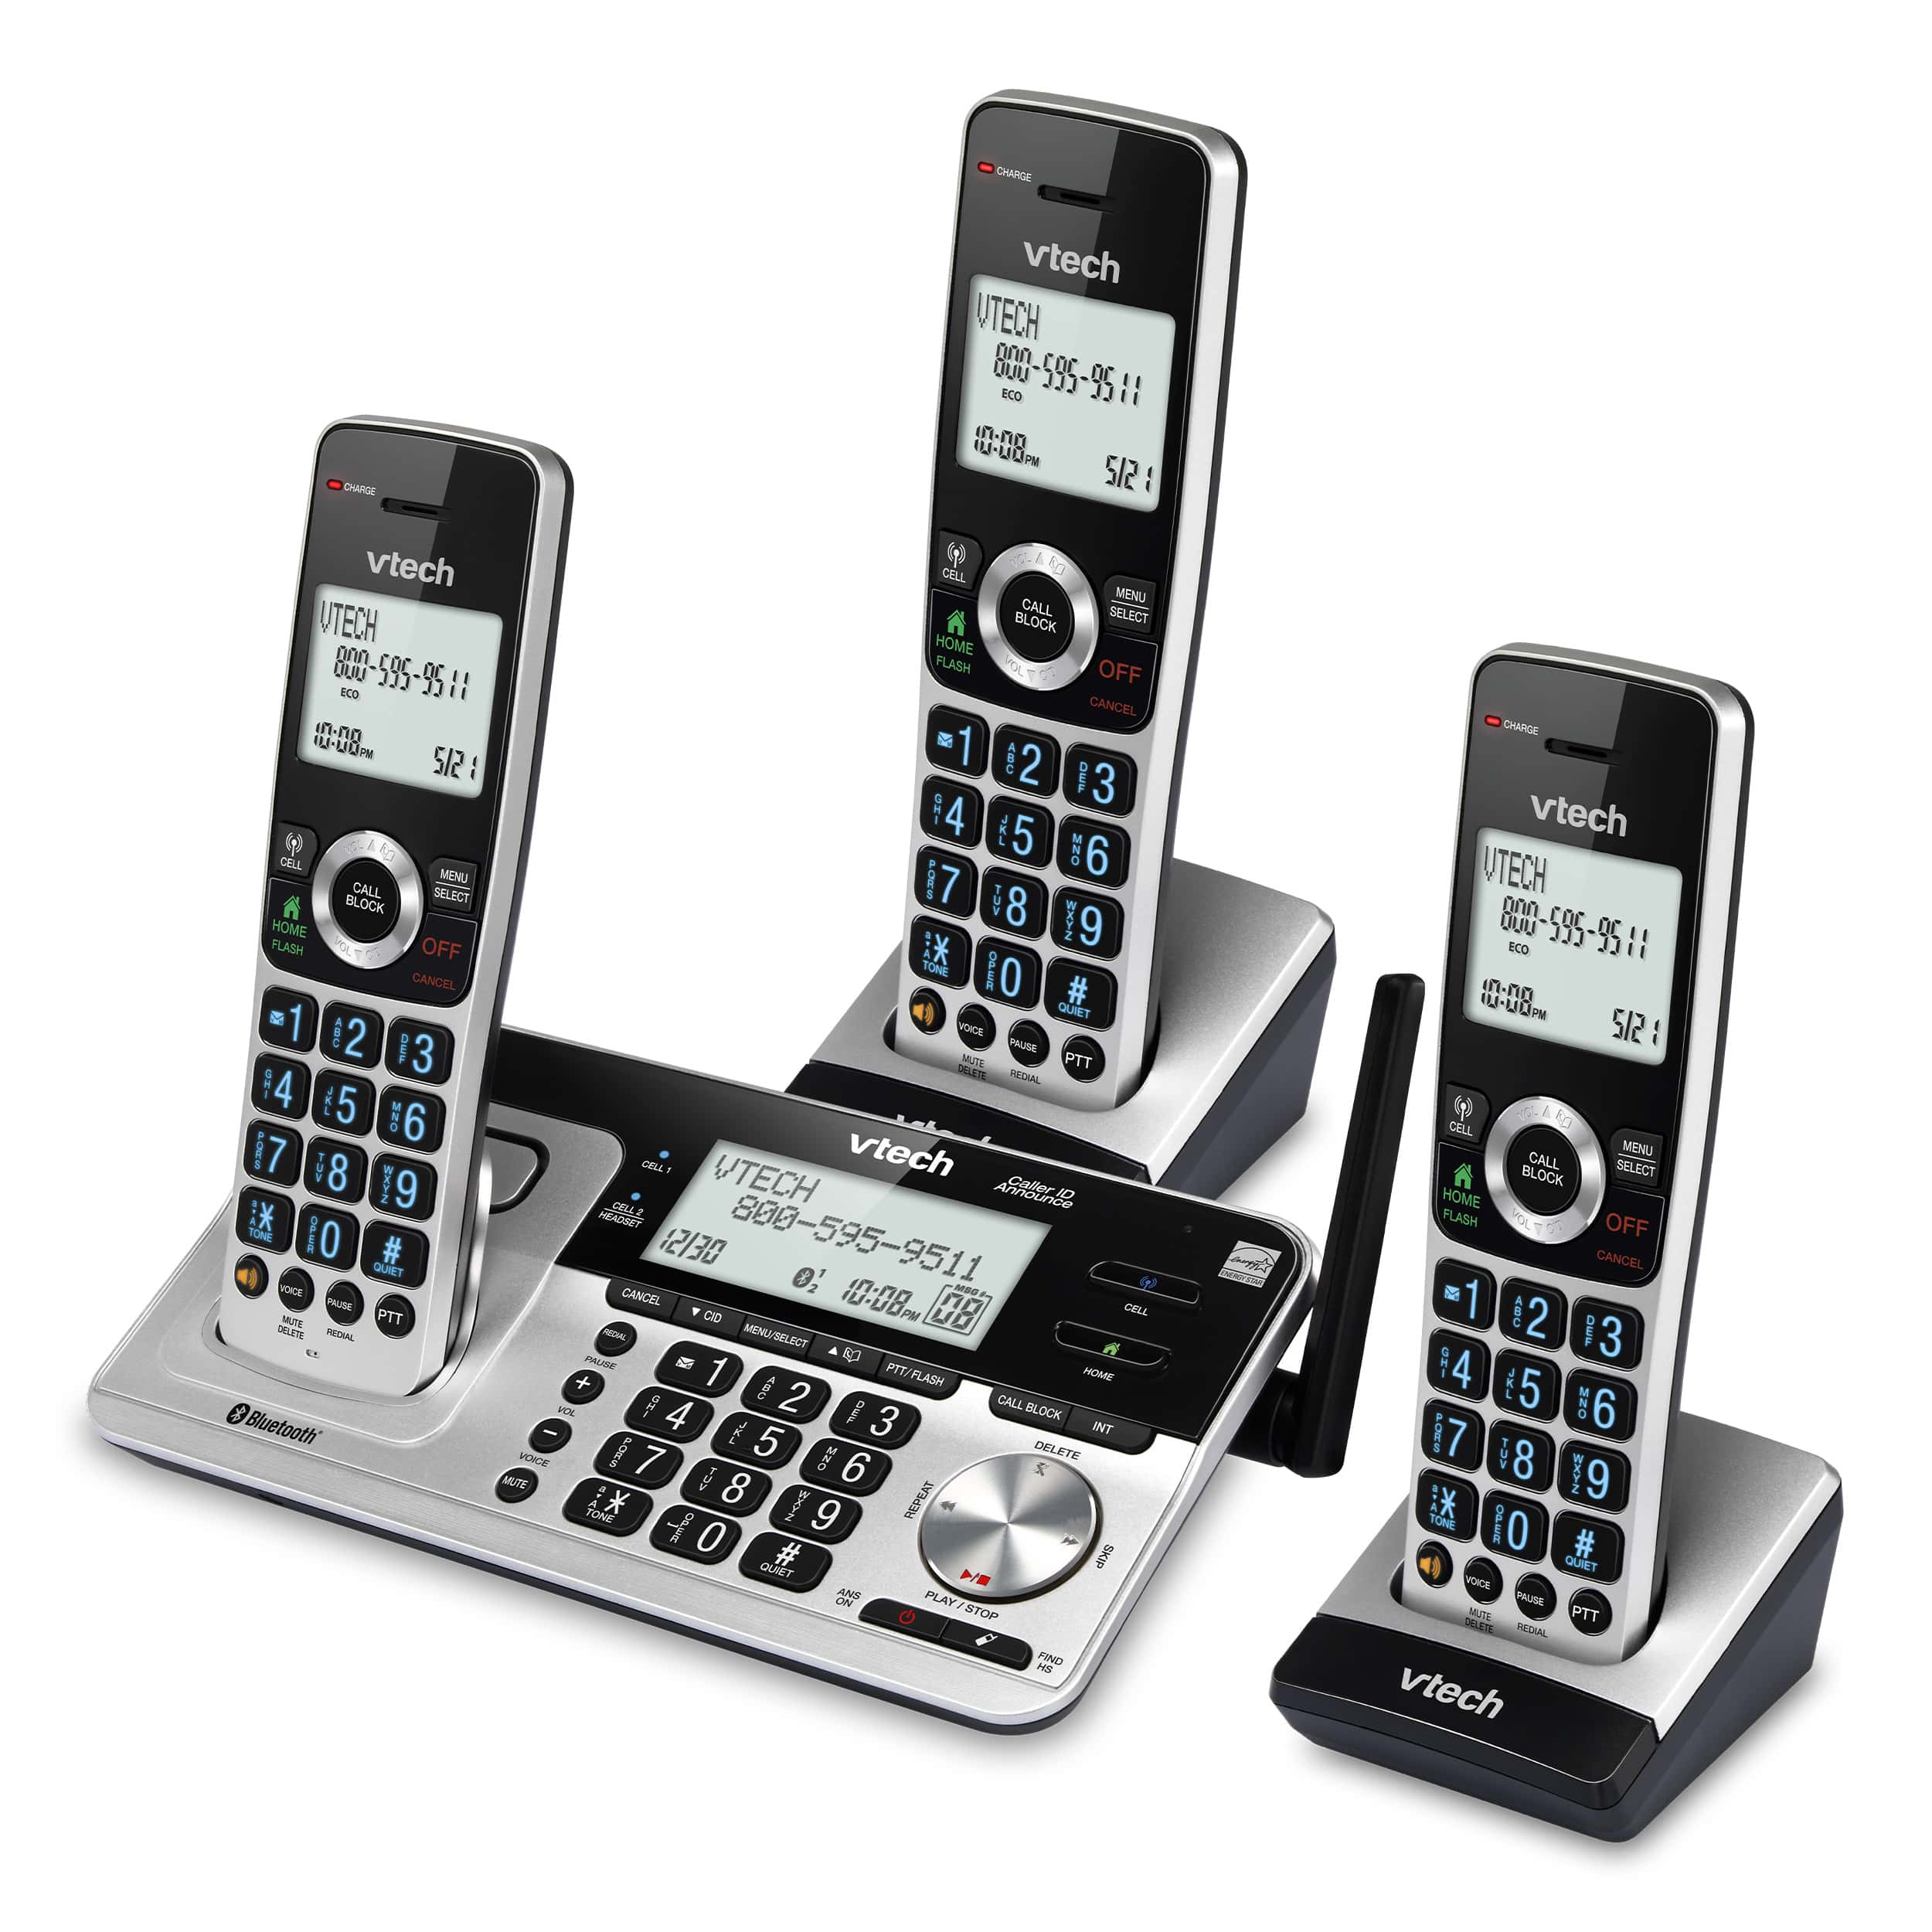 3-Handset Extended Range Expandable Cordless Phone with Bluetooth Connect to Cell, Smart Call Blocker and Answering System - view 2